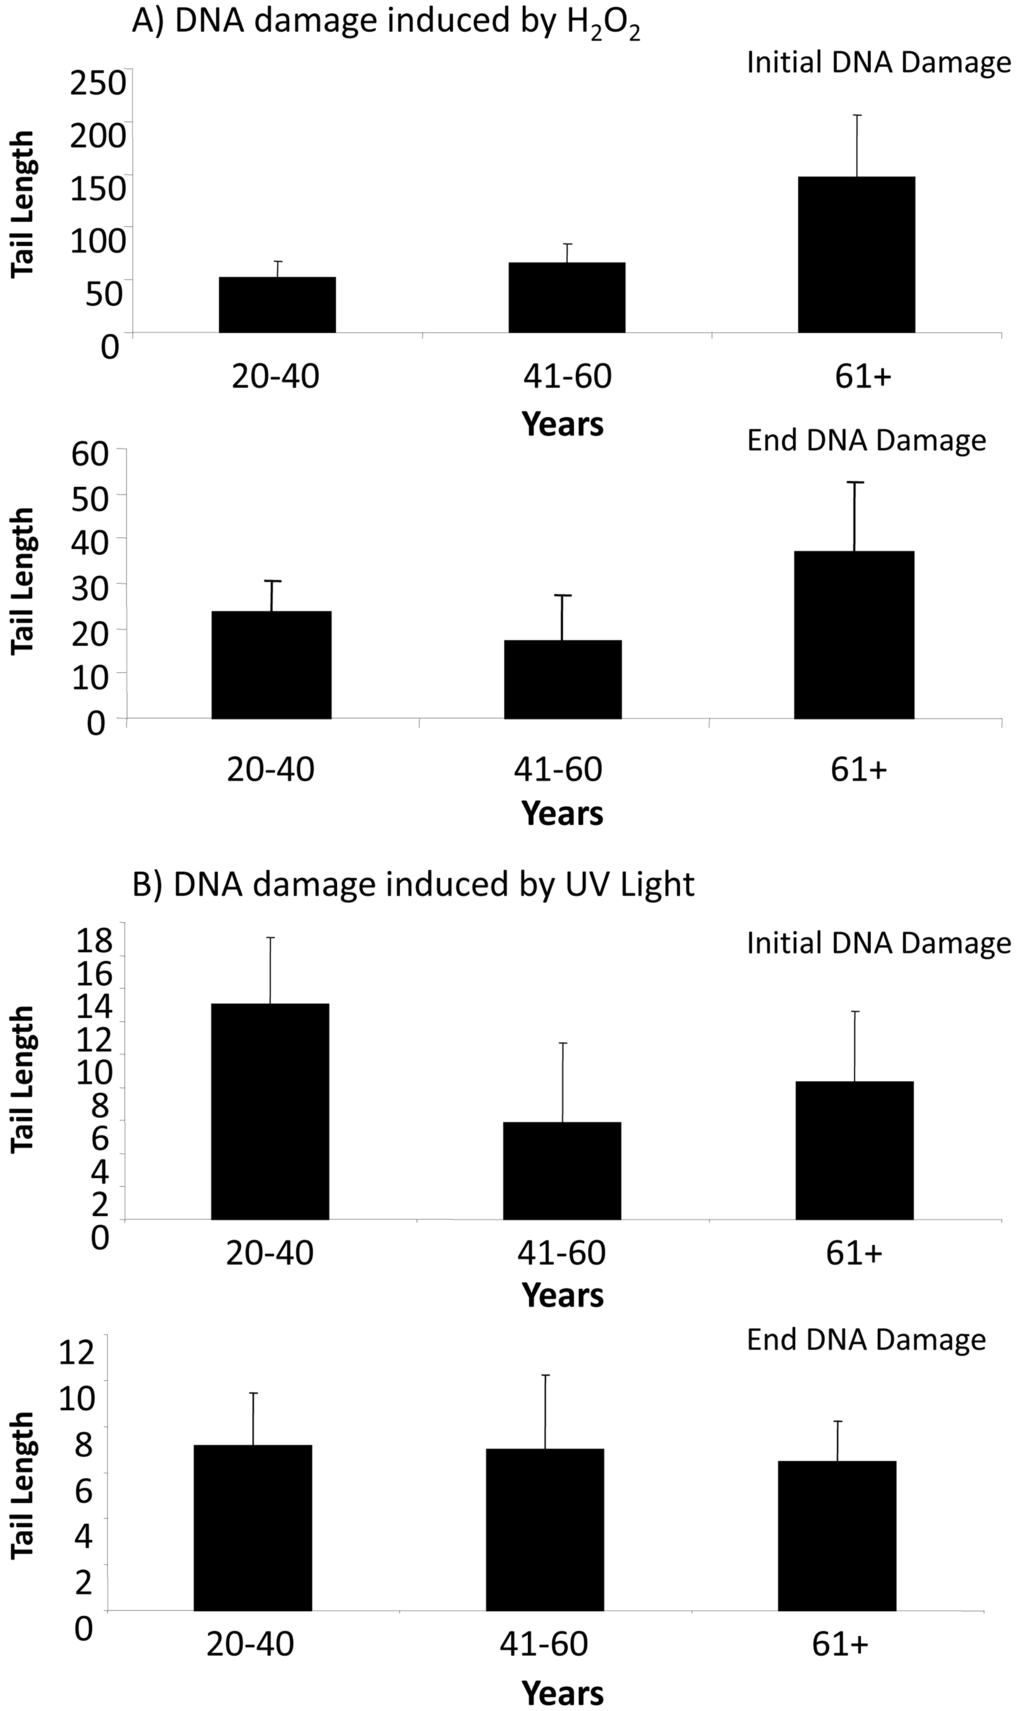 DNA damage in ADSCs treated with H2O2 or UV light. (A) Tail length was quantified in ADSCs derived from young (20-40 years), middle-aged (41-60 years), and older (61+ years) after treatment with H2O2 for 30 minutes. Tail length was measured at the 30 minute (initial DNA damage) and 4 hour (end DNA damage) timepoints. Although tail length was longer in the ADSCs derived from 61+ year old donors, the tail length in differently aged ADSCs was statistically comparable. (B) Tail length was measured in ADSCs from differently aged sources following treatment with UV light for 30 minutes. Tail length was statistically comparable in ADSCs derived from young, middle-aged, and older donors. In comparison to ADSCs treated with H2O2, tail length was drastically shorter in ADSCs treated with UV light.